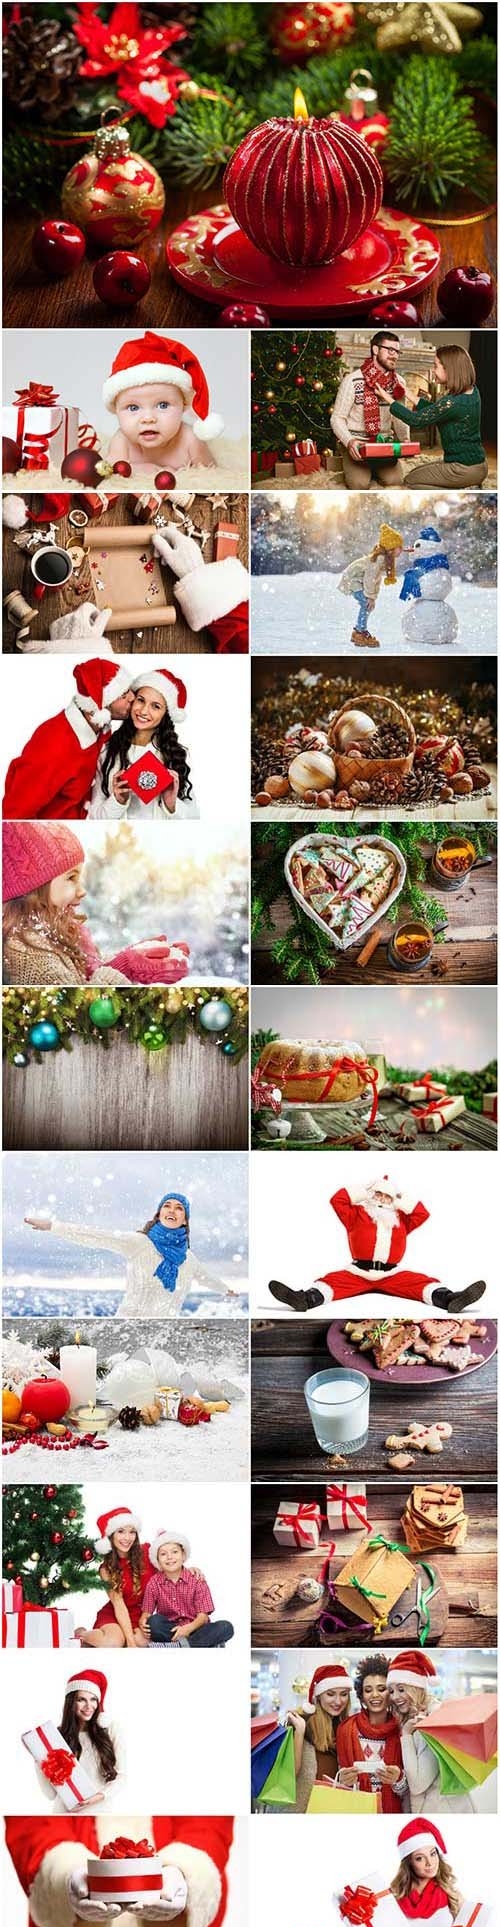 New Year and Christmas stock photos 95